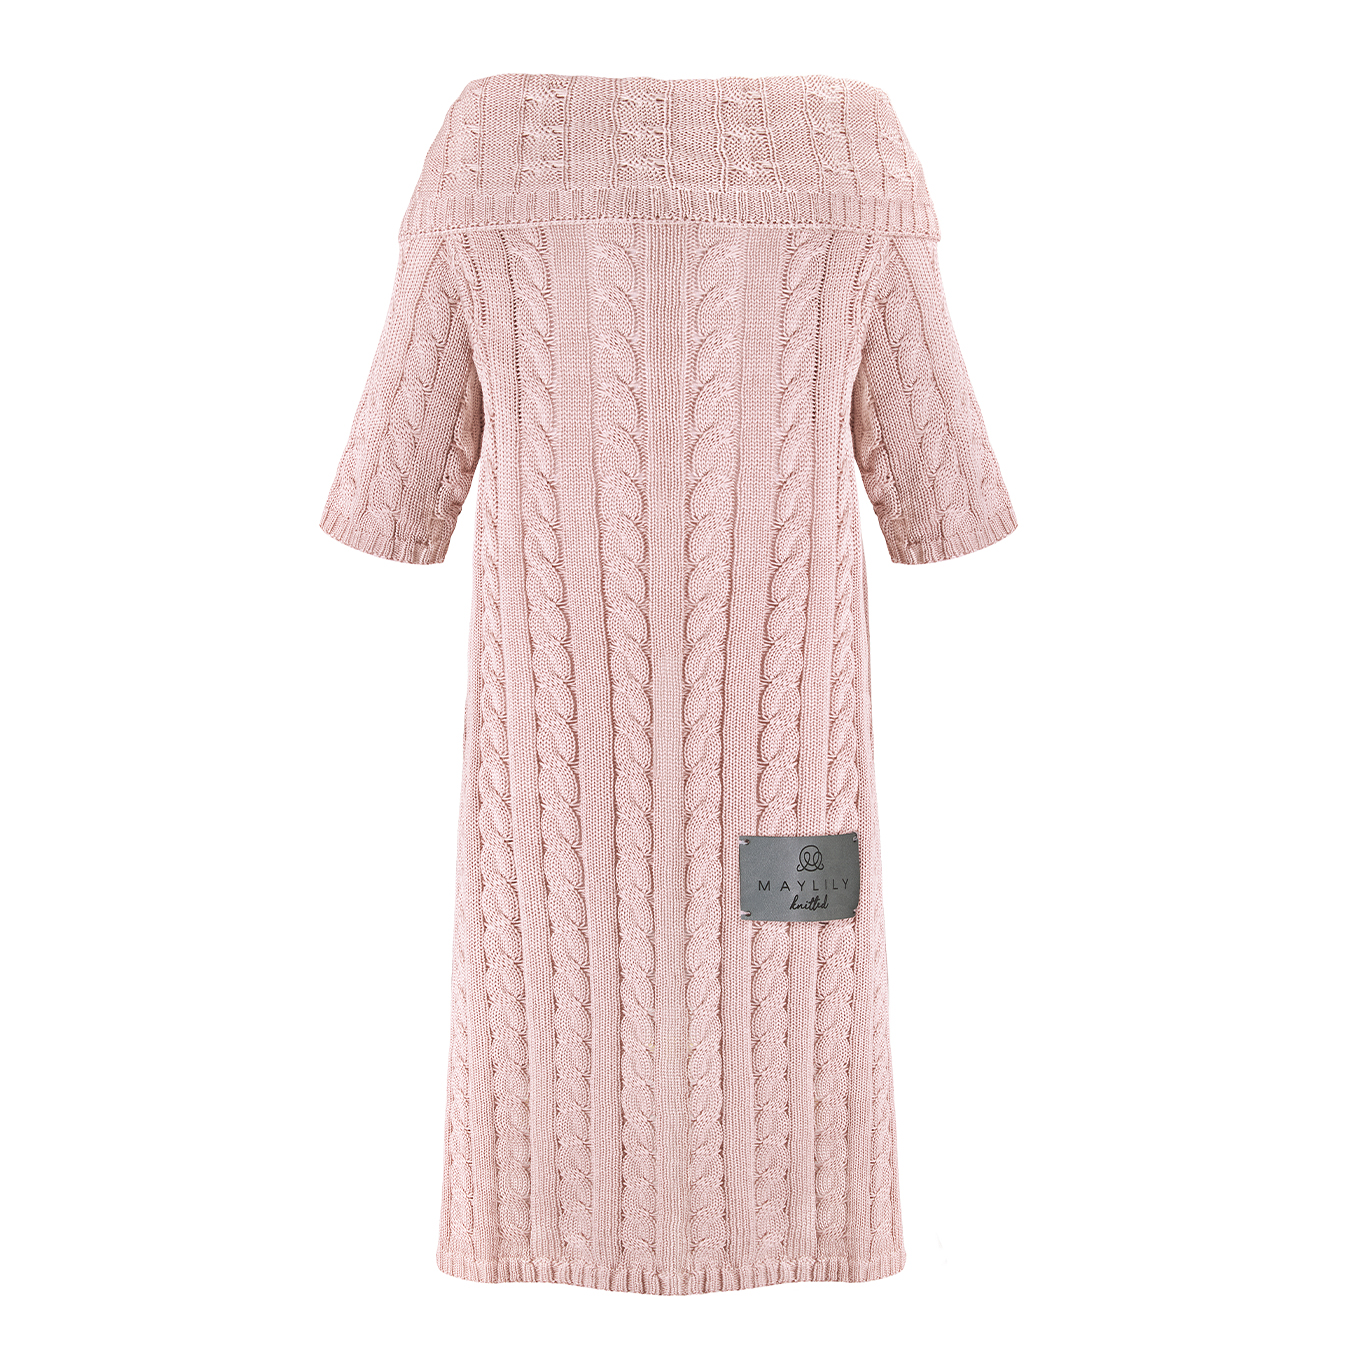 Bamboo sleeved blanket - dusty pink